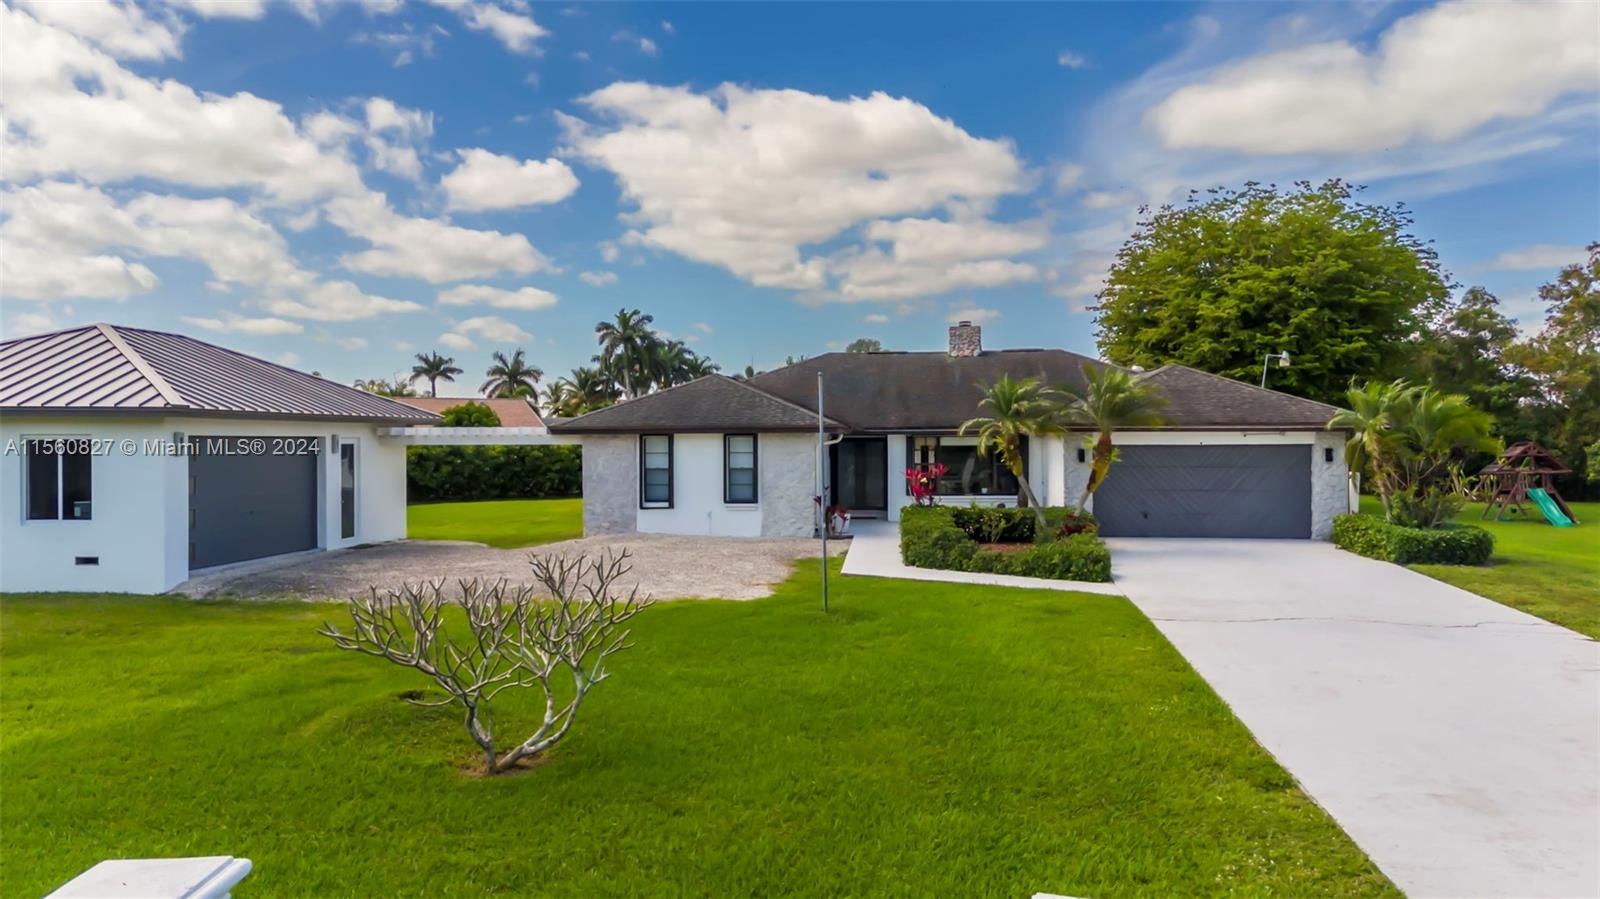 5341 Hawkhurst Ave, Southwest Ranches, Broward County, Florida - 4 Bedrooms  
3 Bathrooms - 